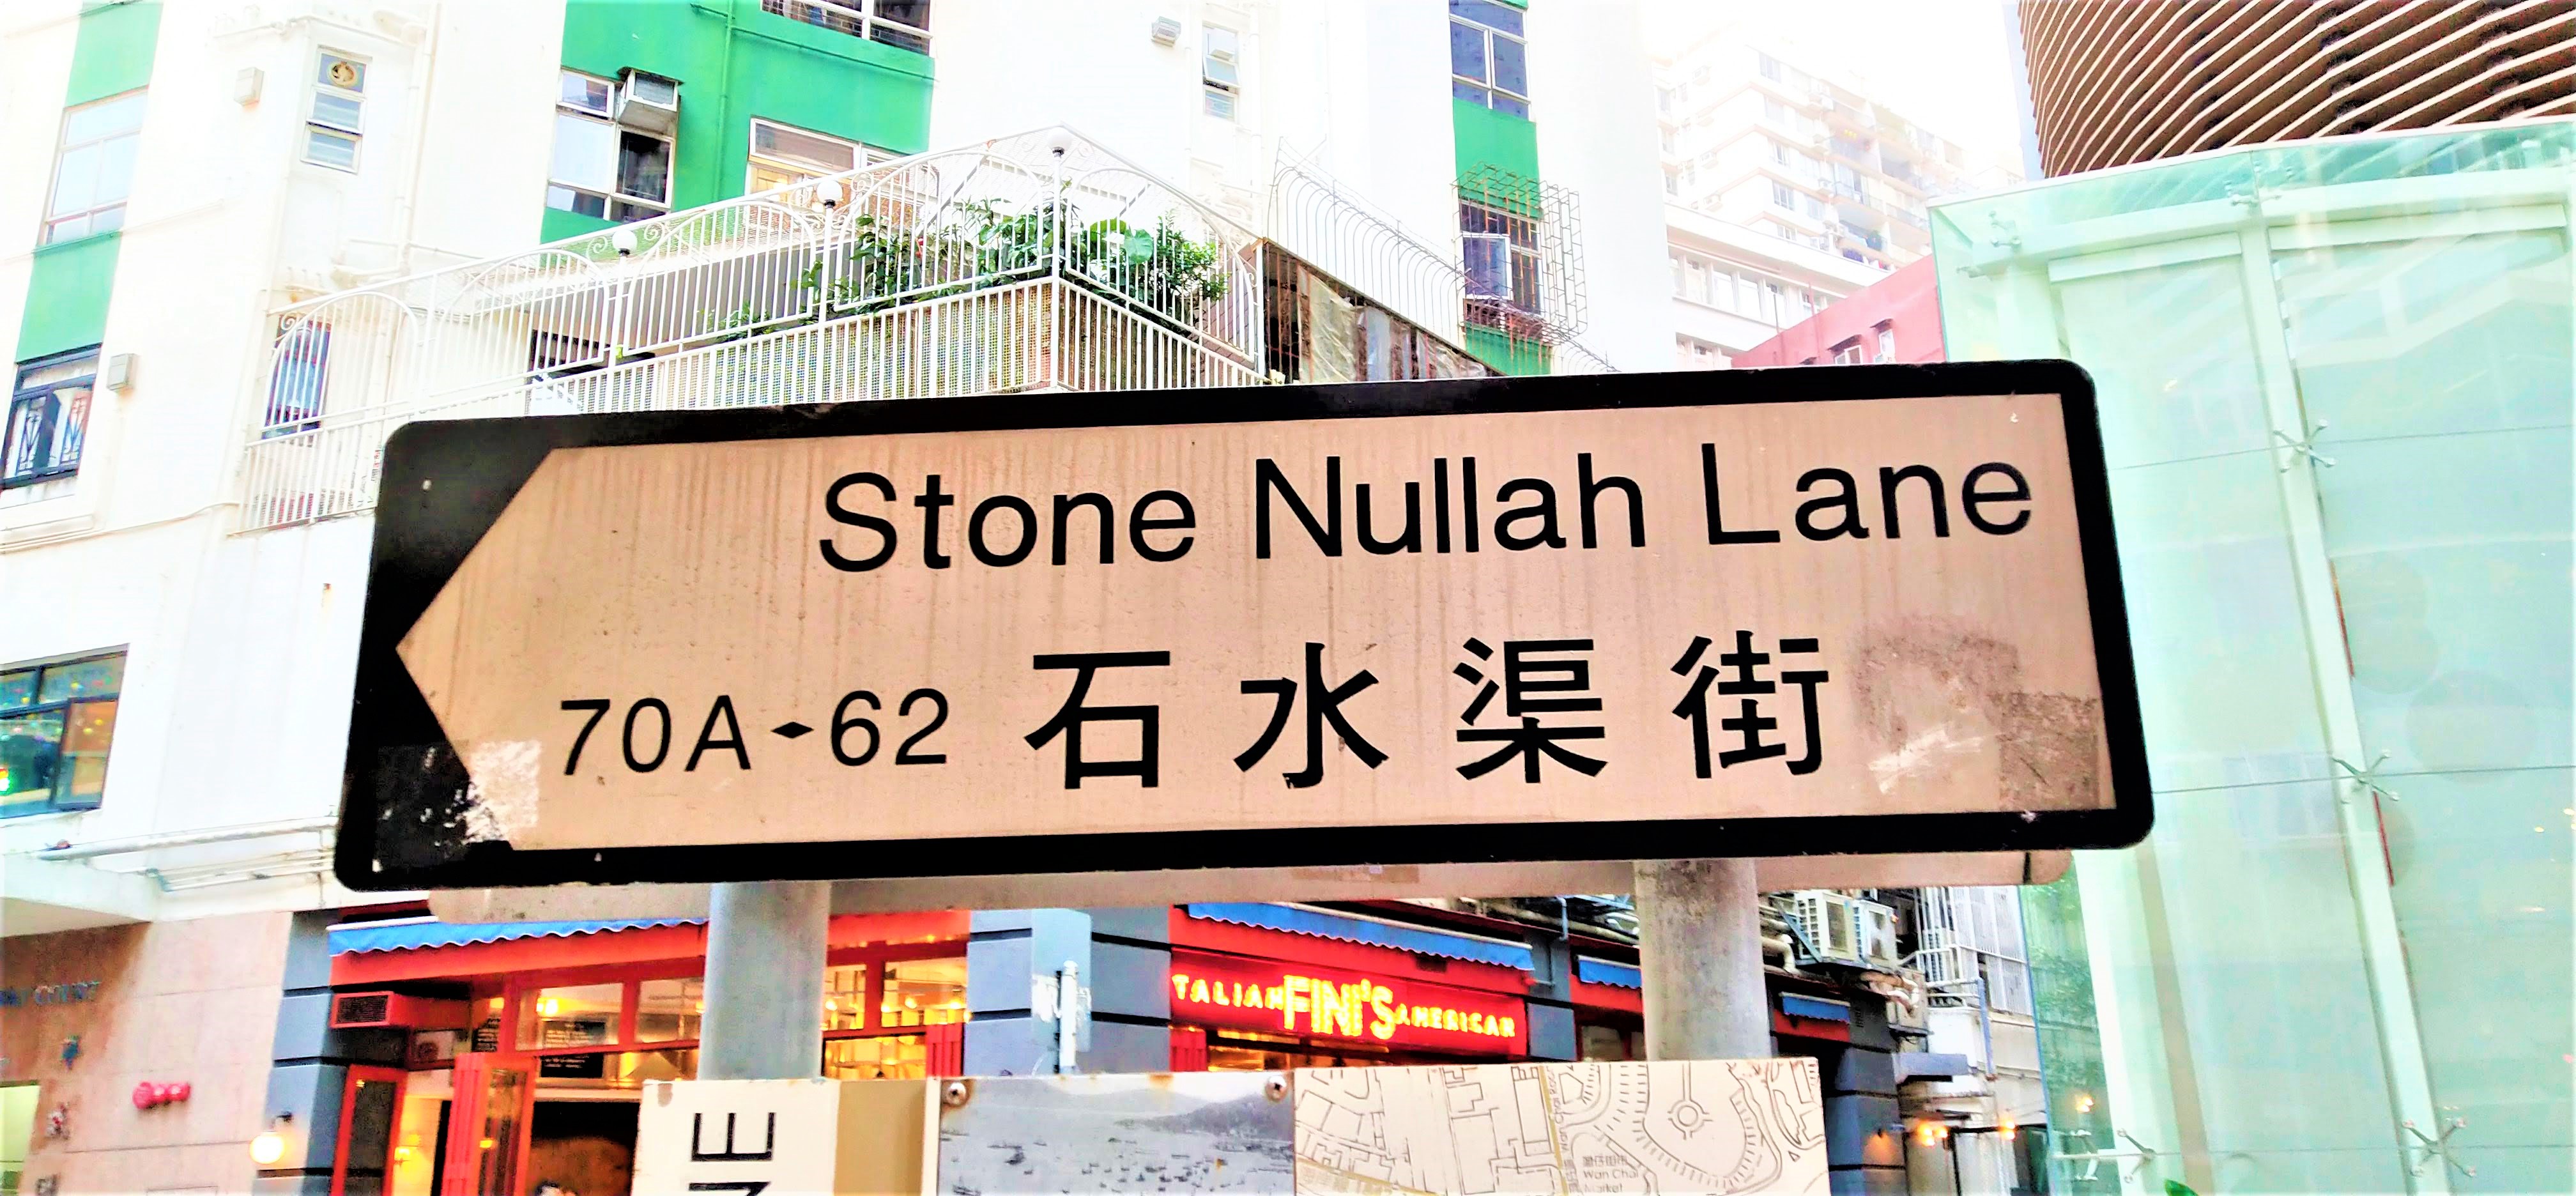 Stone Nullah Lane was the water source for Dent's Spring Garden in the past